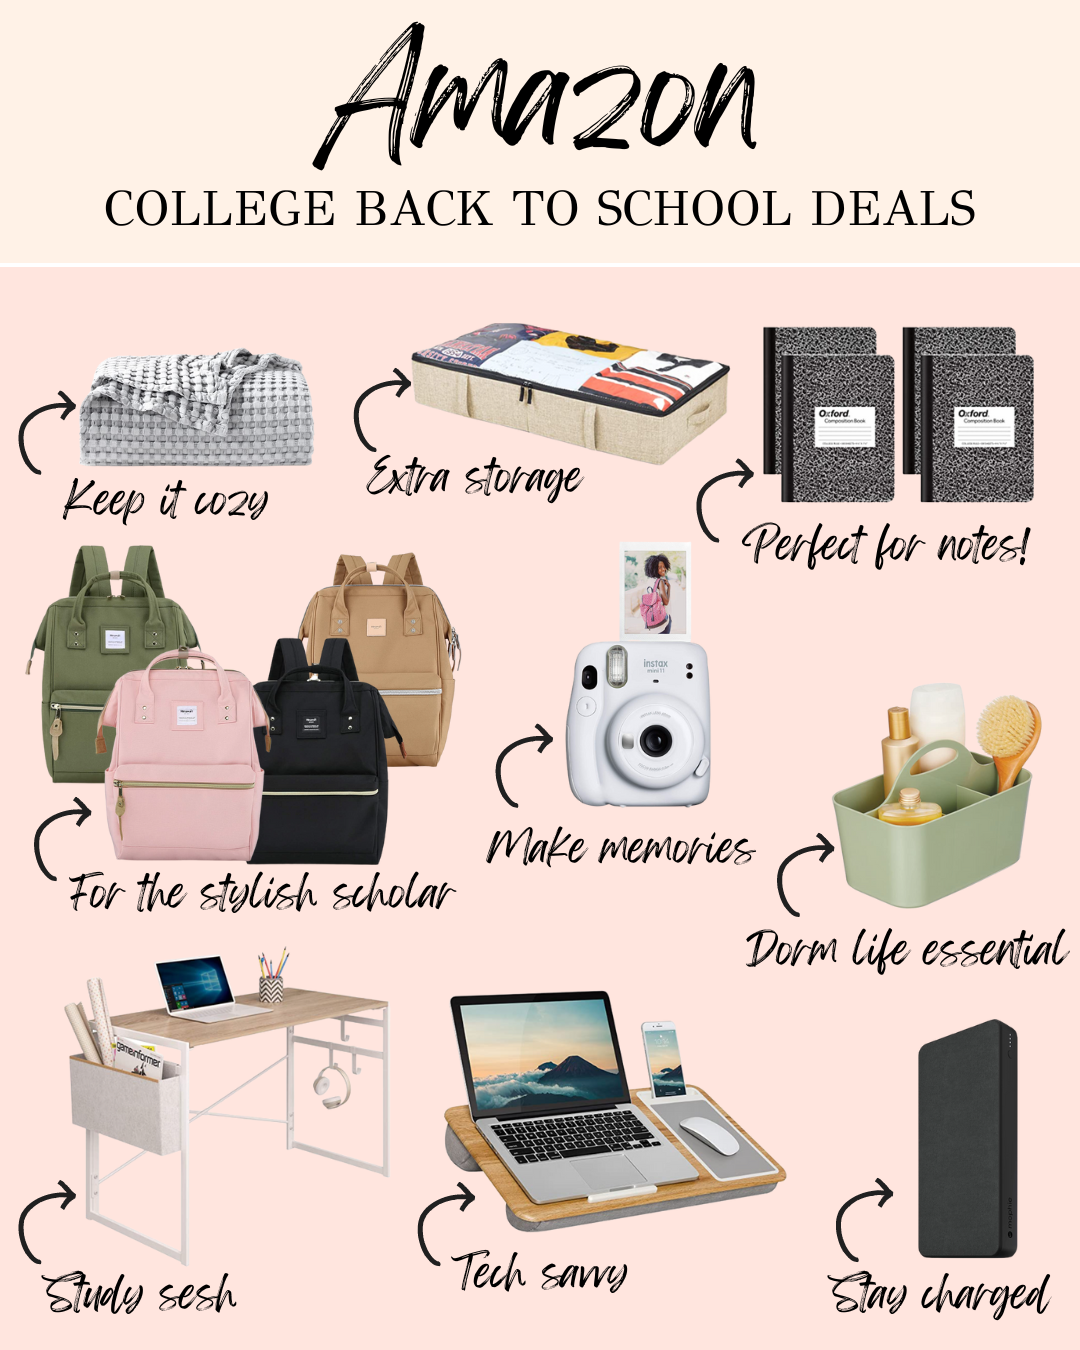 Best-Selling College Back To School Deals